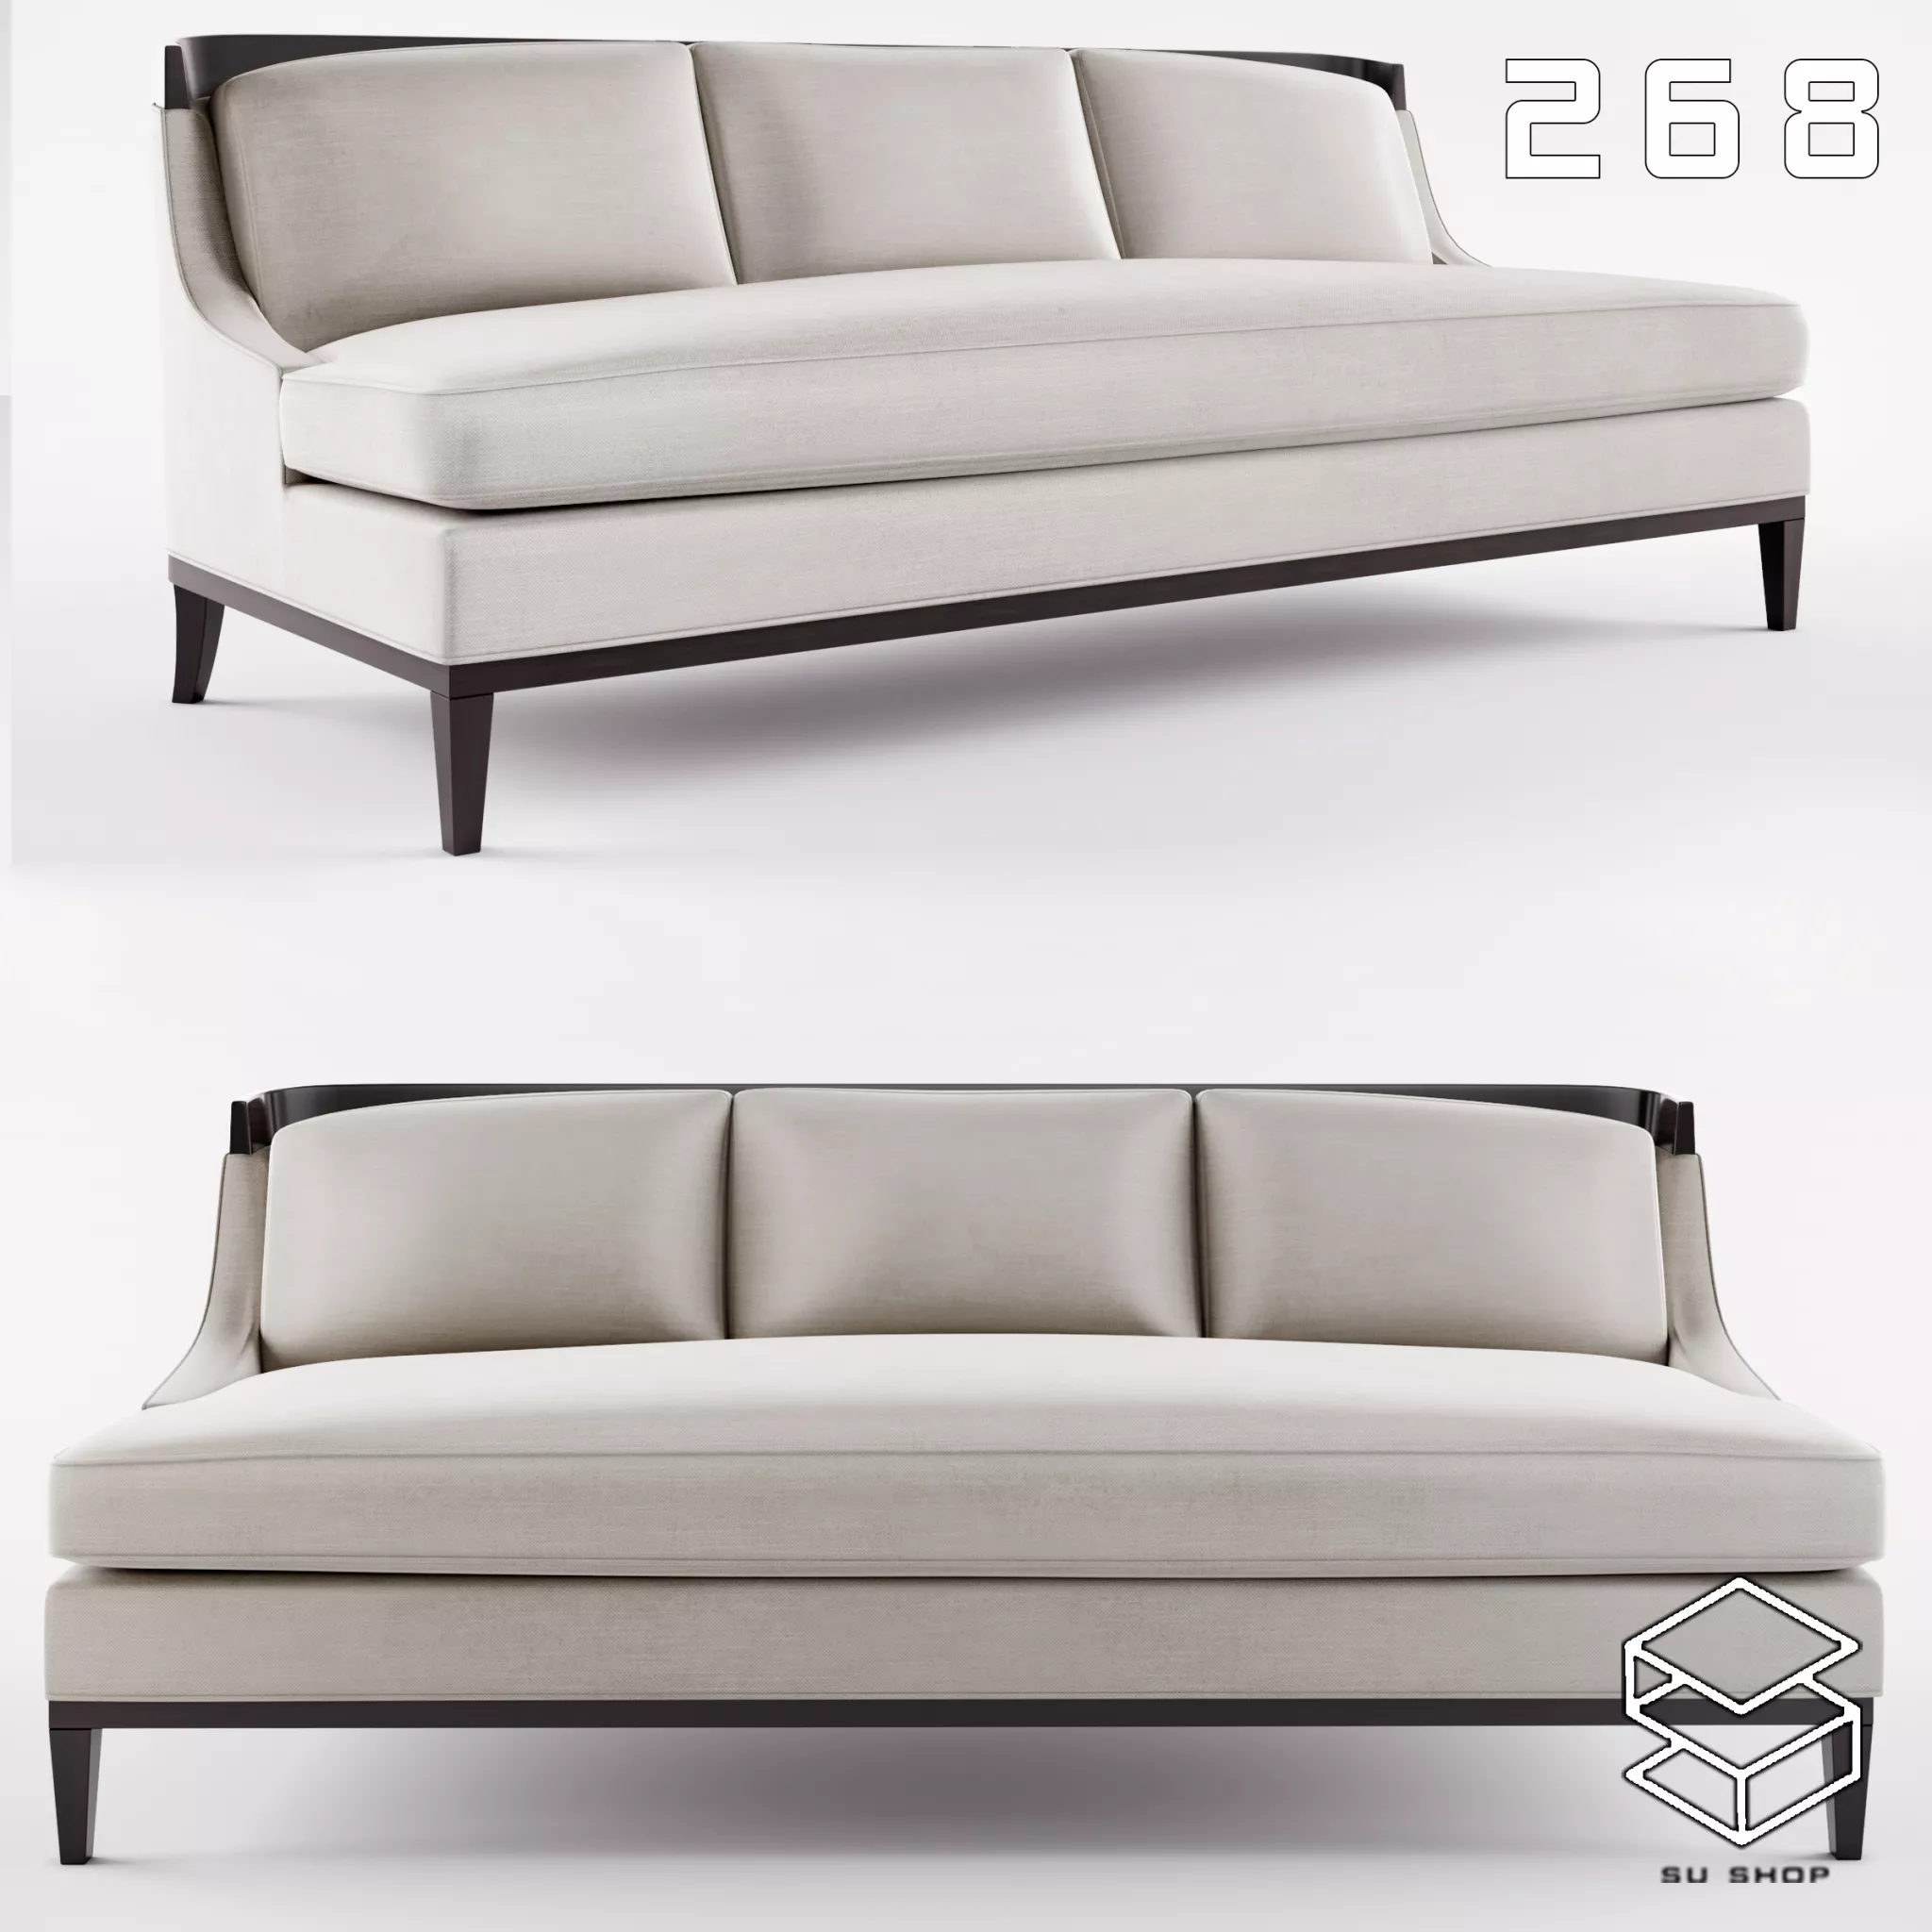 MODERN SOFA - SKETCHUP 3D MODEL - VRAY OR ENSCAPE - ID13572